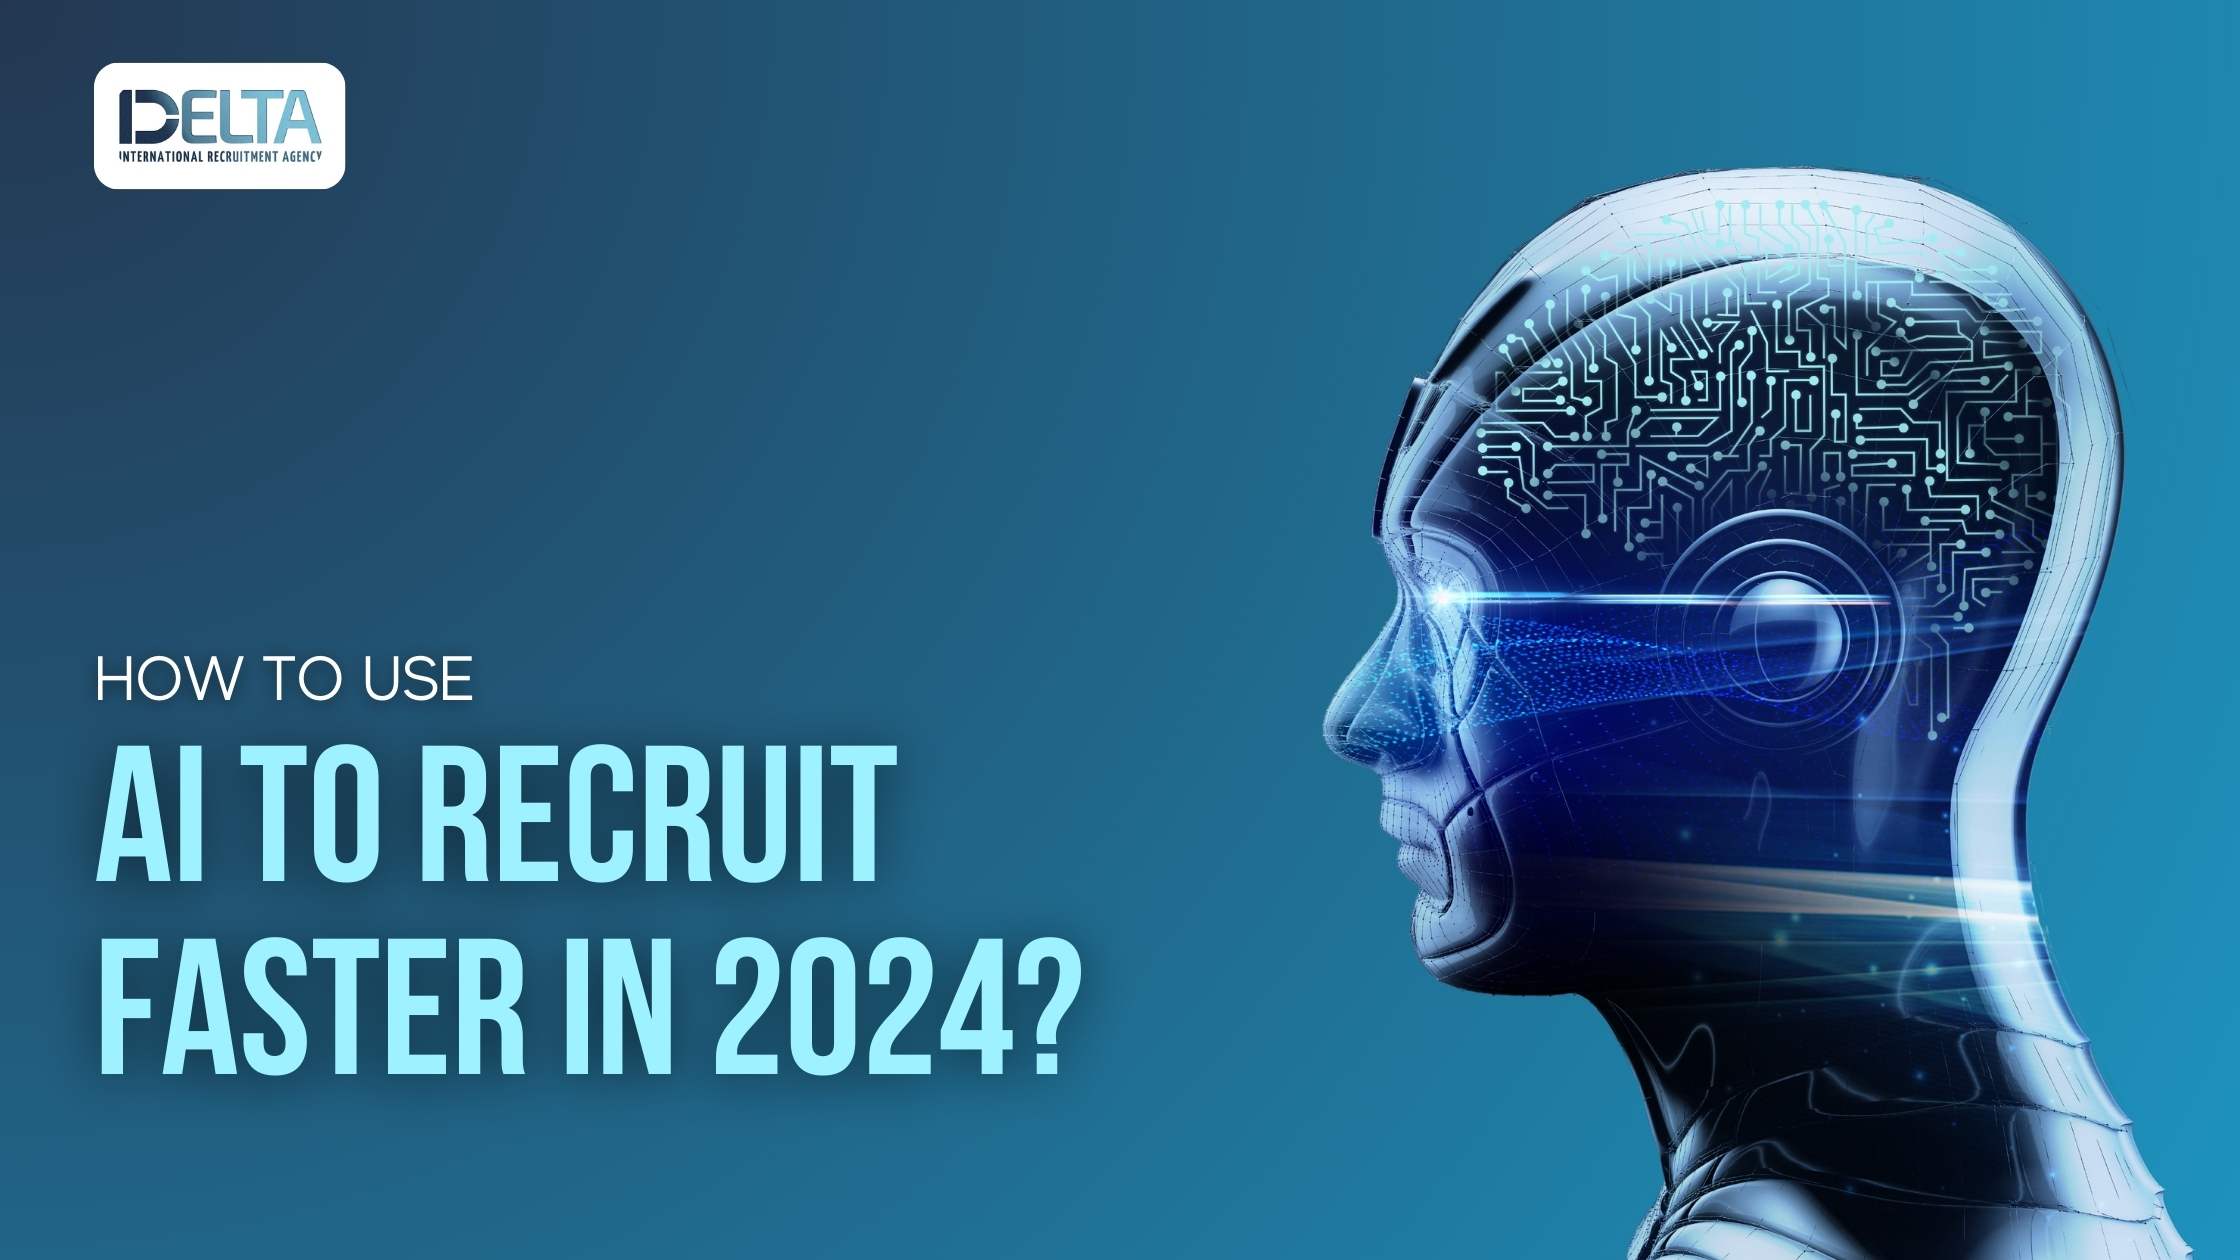 How to Use AI to Recruit Faster in 2024?